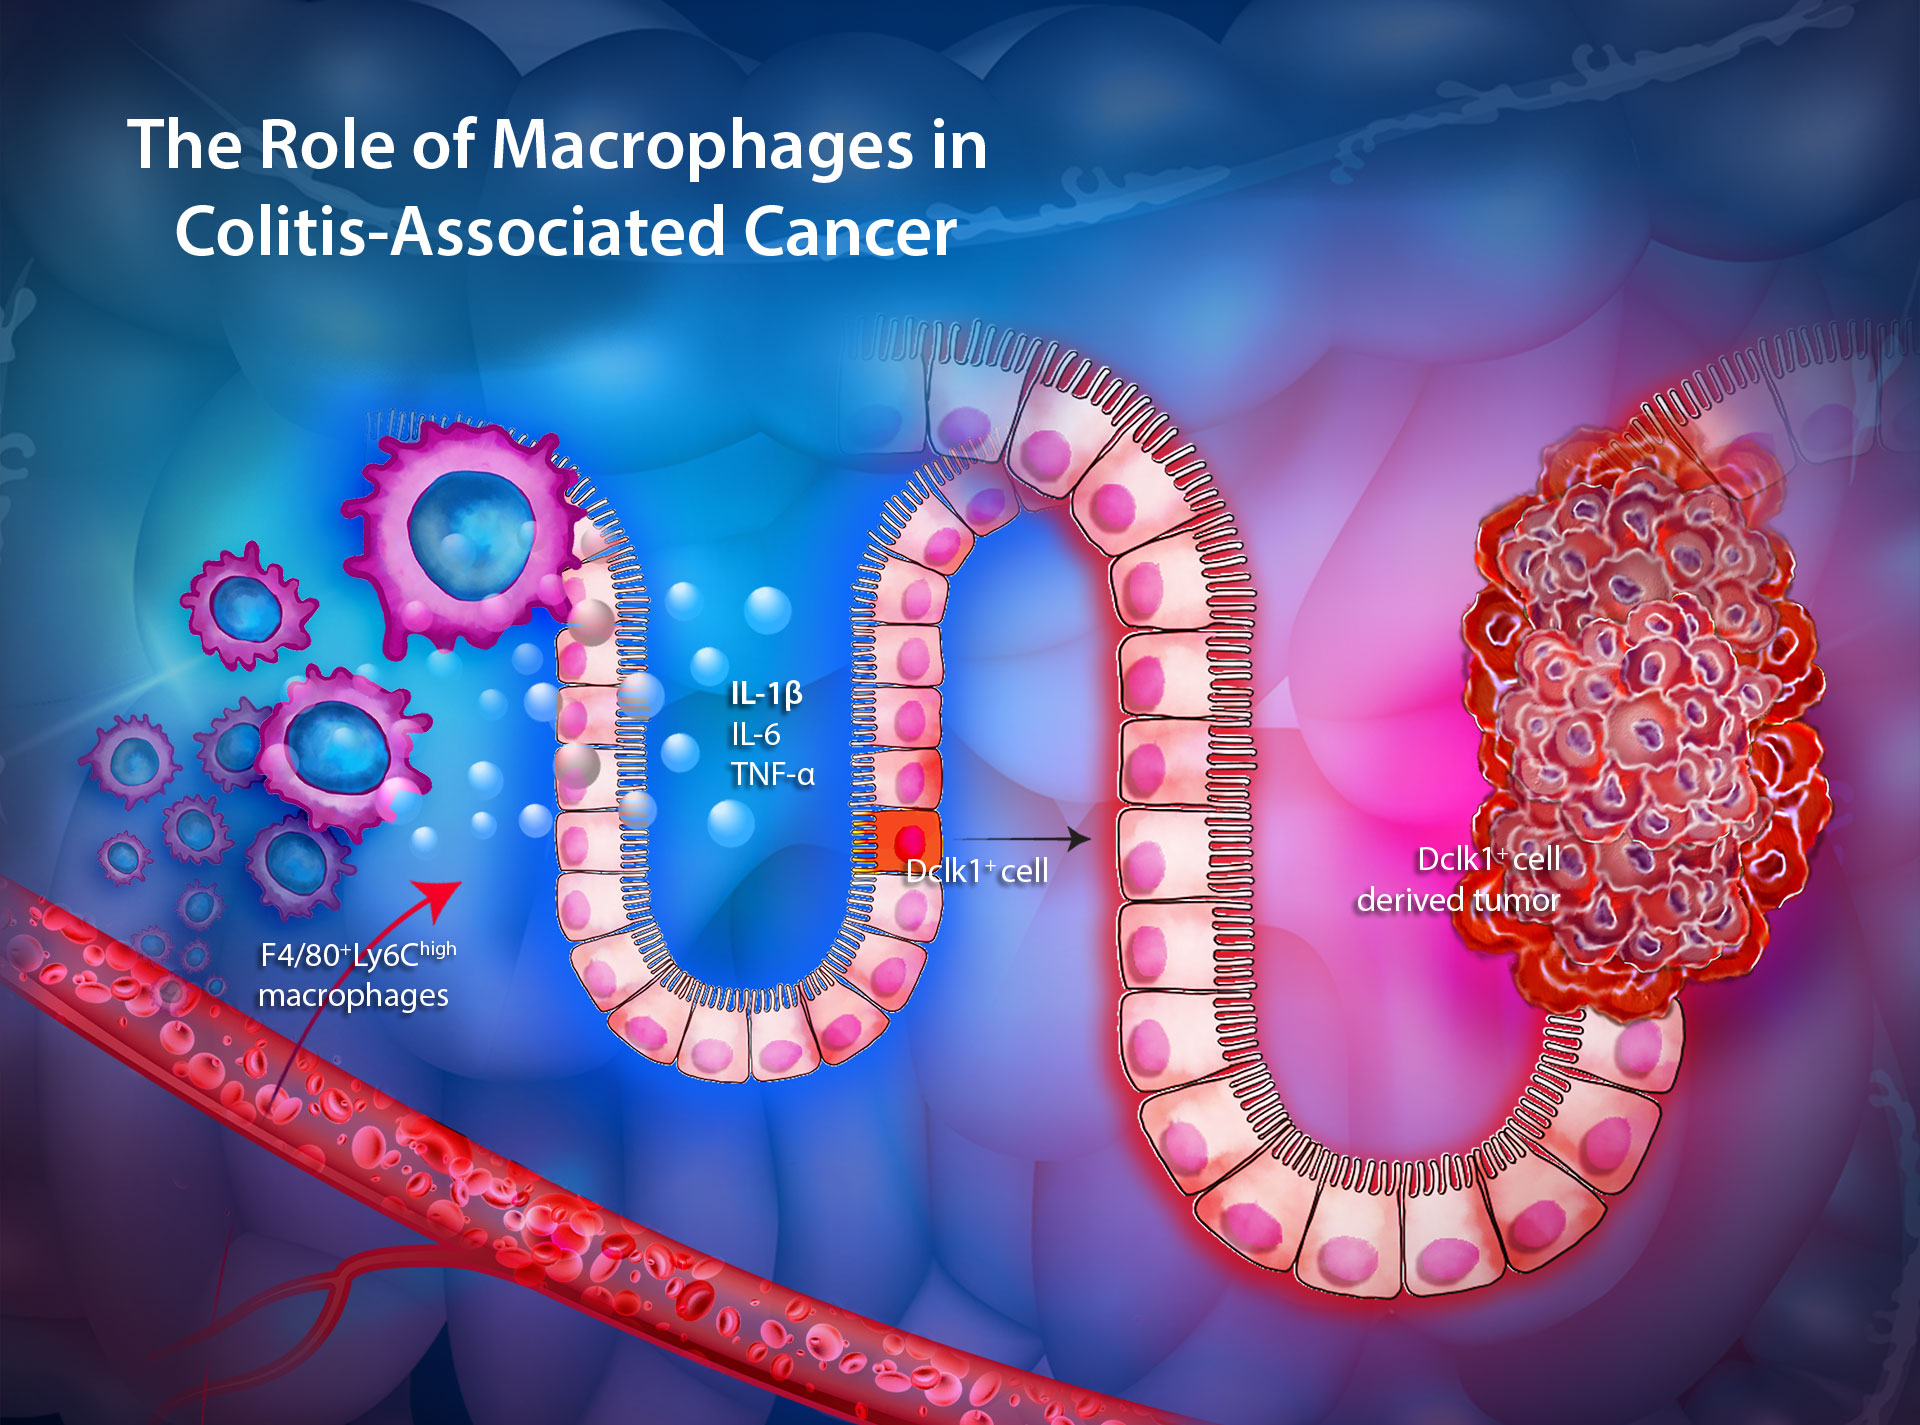 The role of macrophages in in colitis-associated cancer (Source: Gastroenterology)